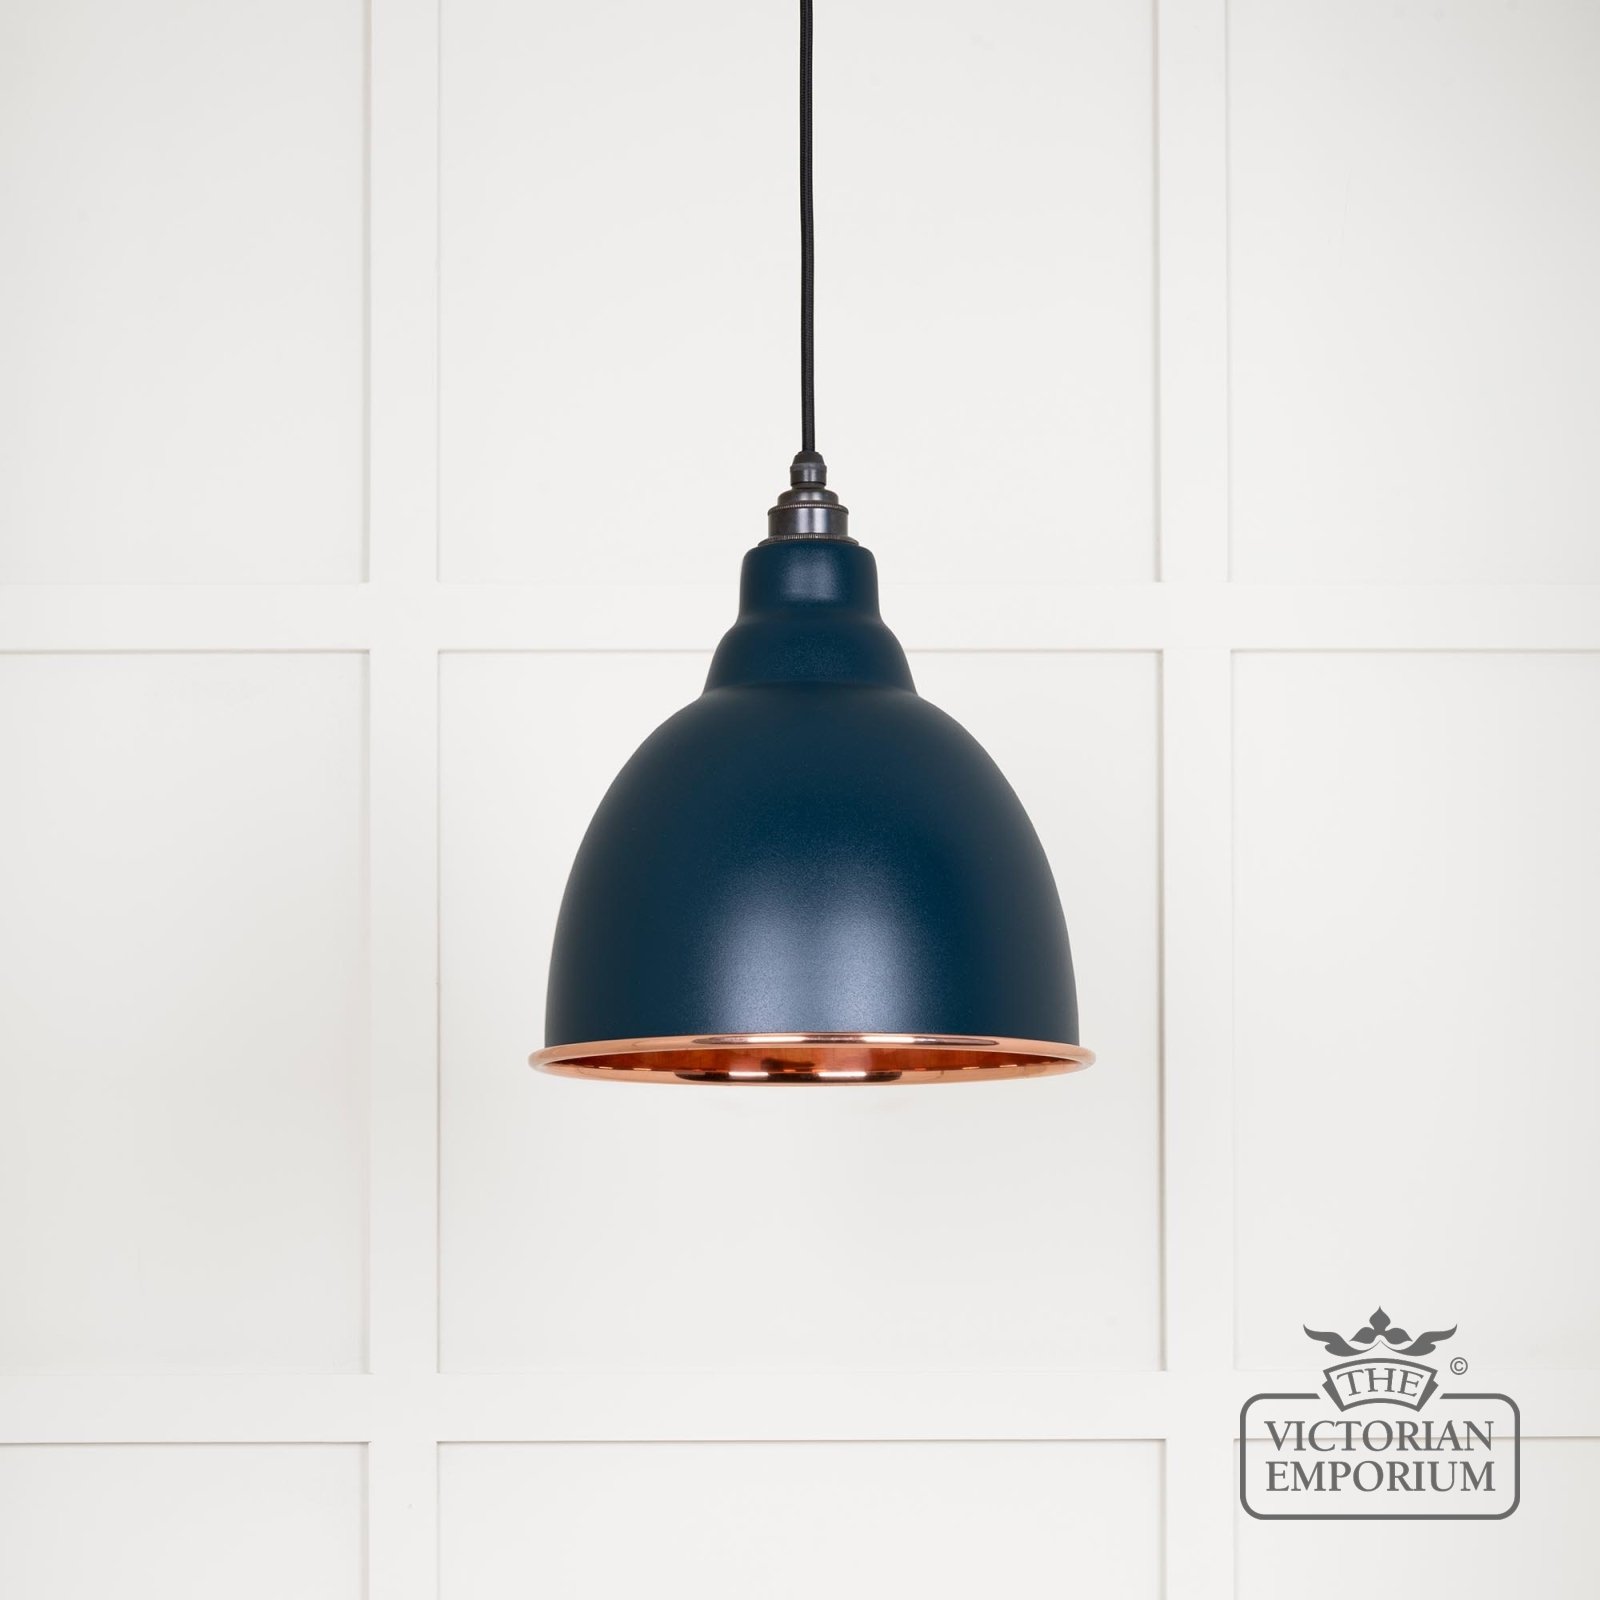 Brindle Pendant light in Smooth Copper with Dusk Exterior